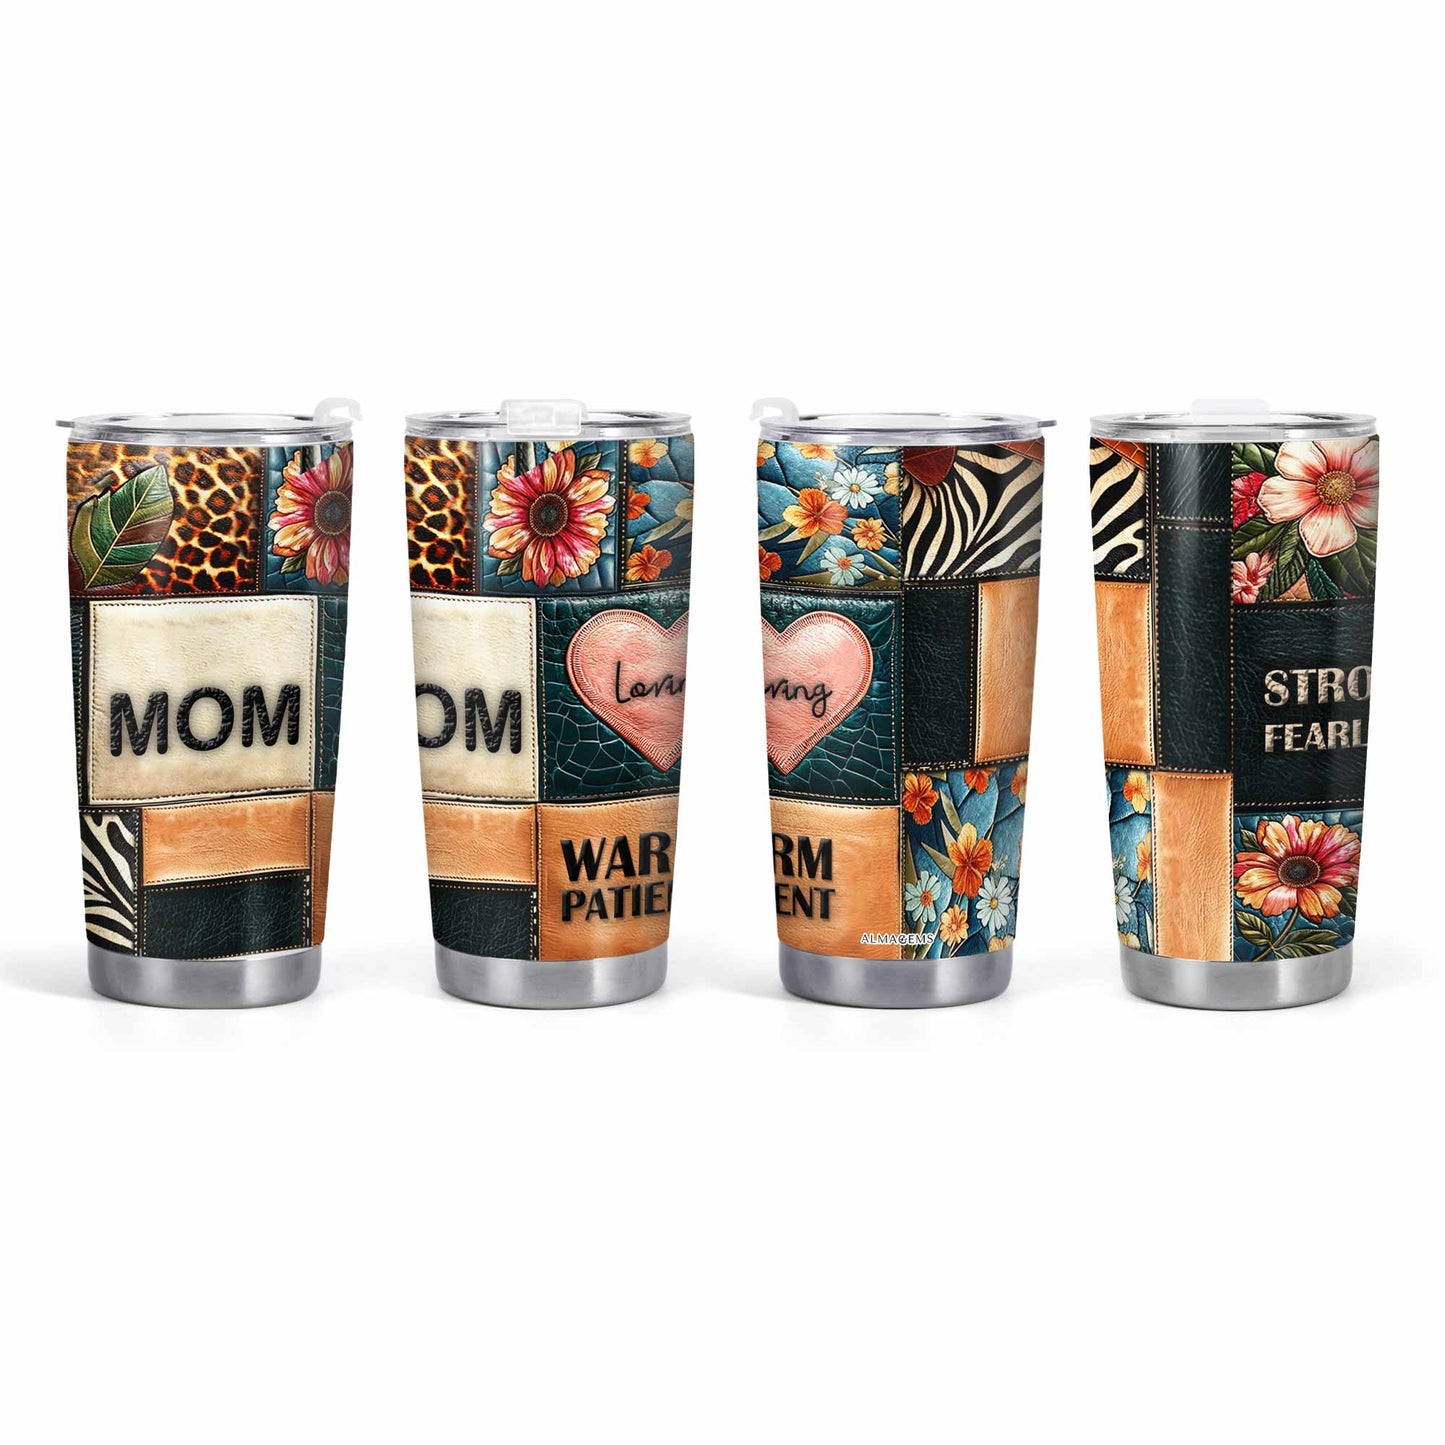 Mom - Personalized Stainless Steel Tumbler 20oz - MM13TB